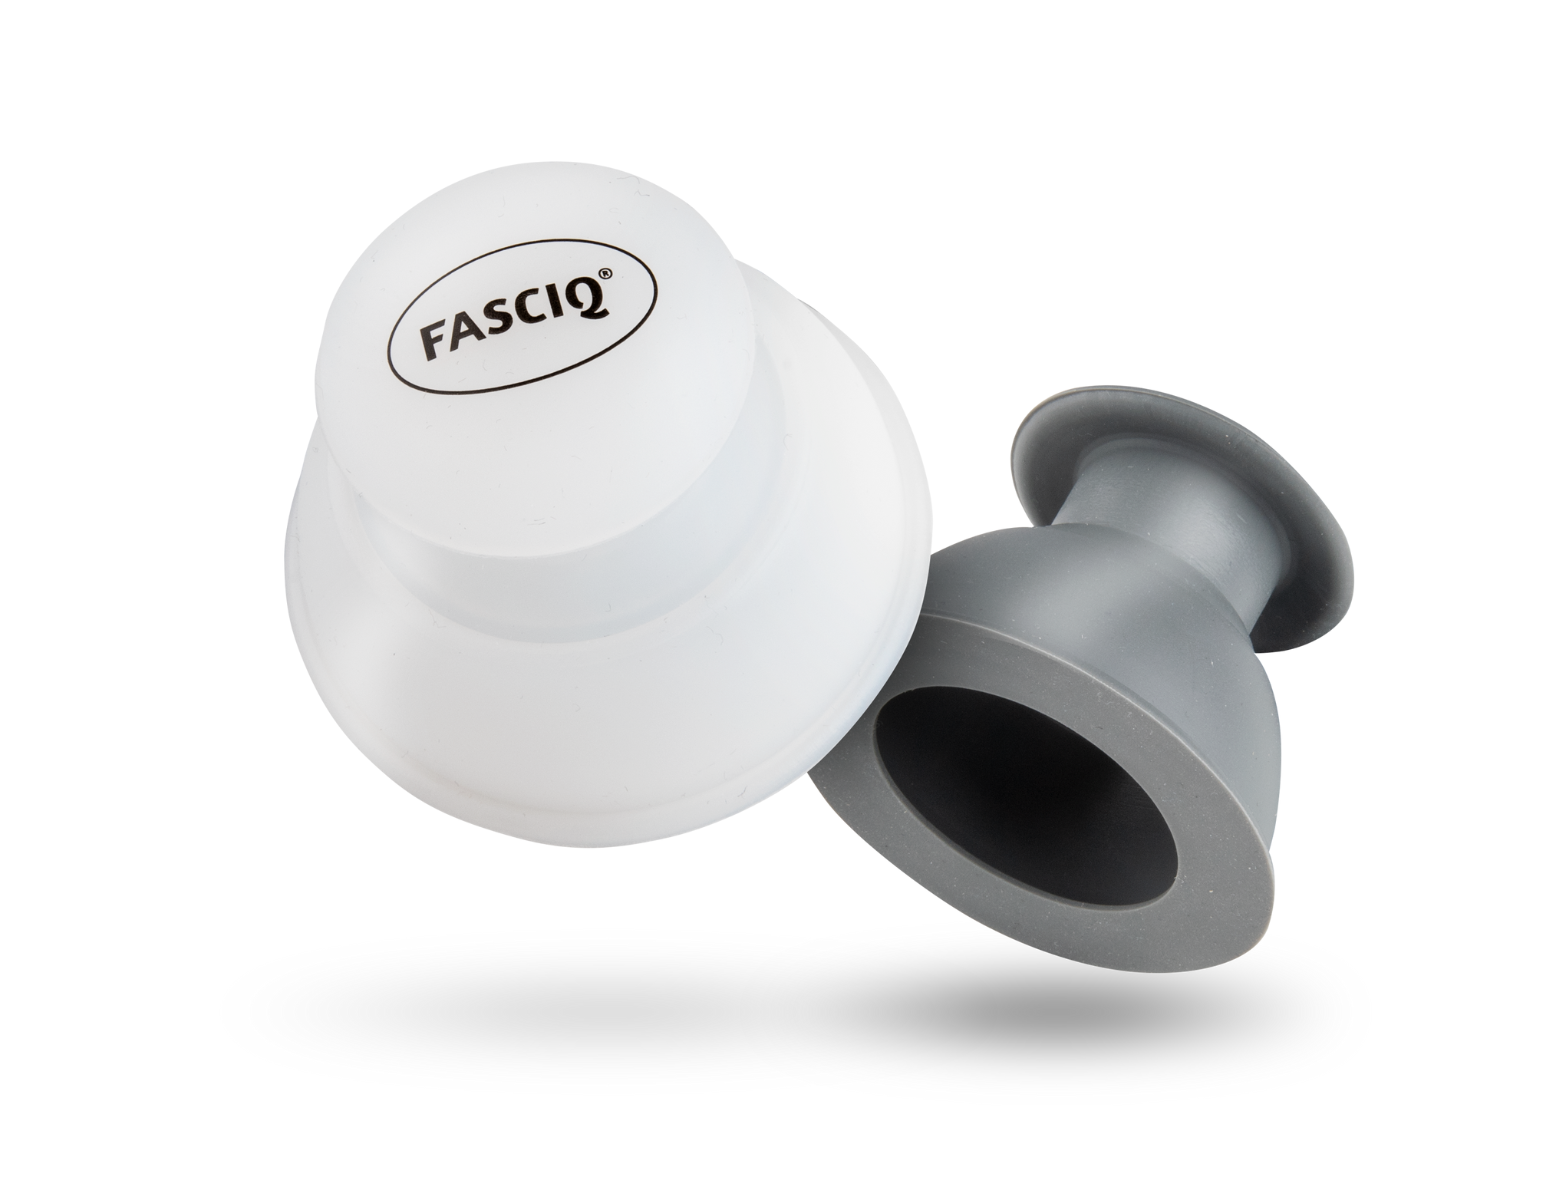 Fasciq EasyPush triggerpoint cuppingset in etui